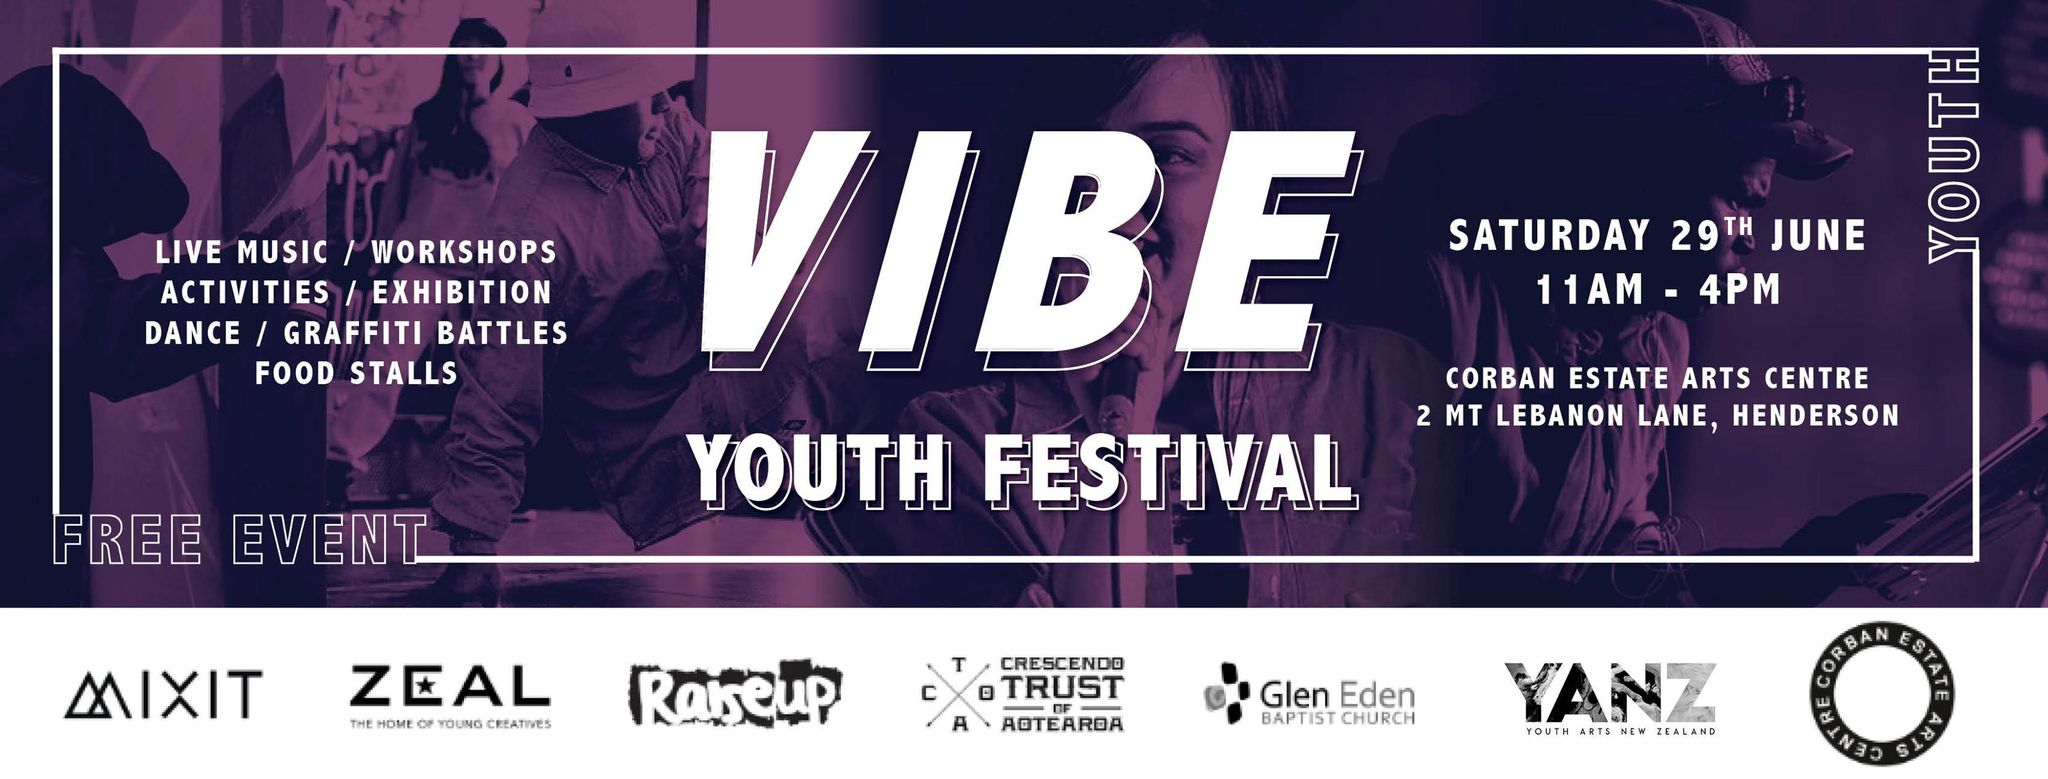 Vibe Youth Festival – Live Music, Workshops, Activities, Exhibition, Dance, Graffiti Battles, Food Stalls